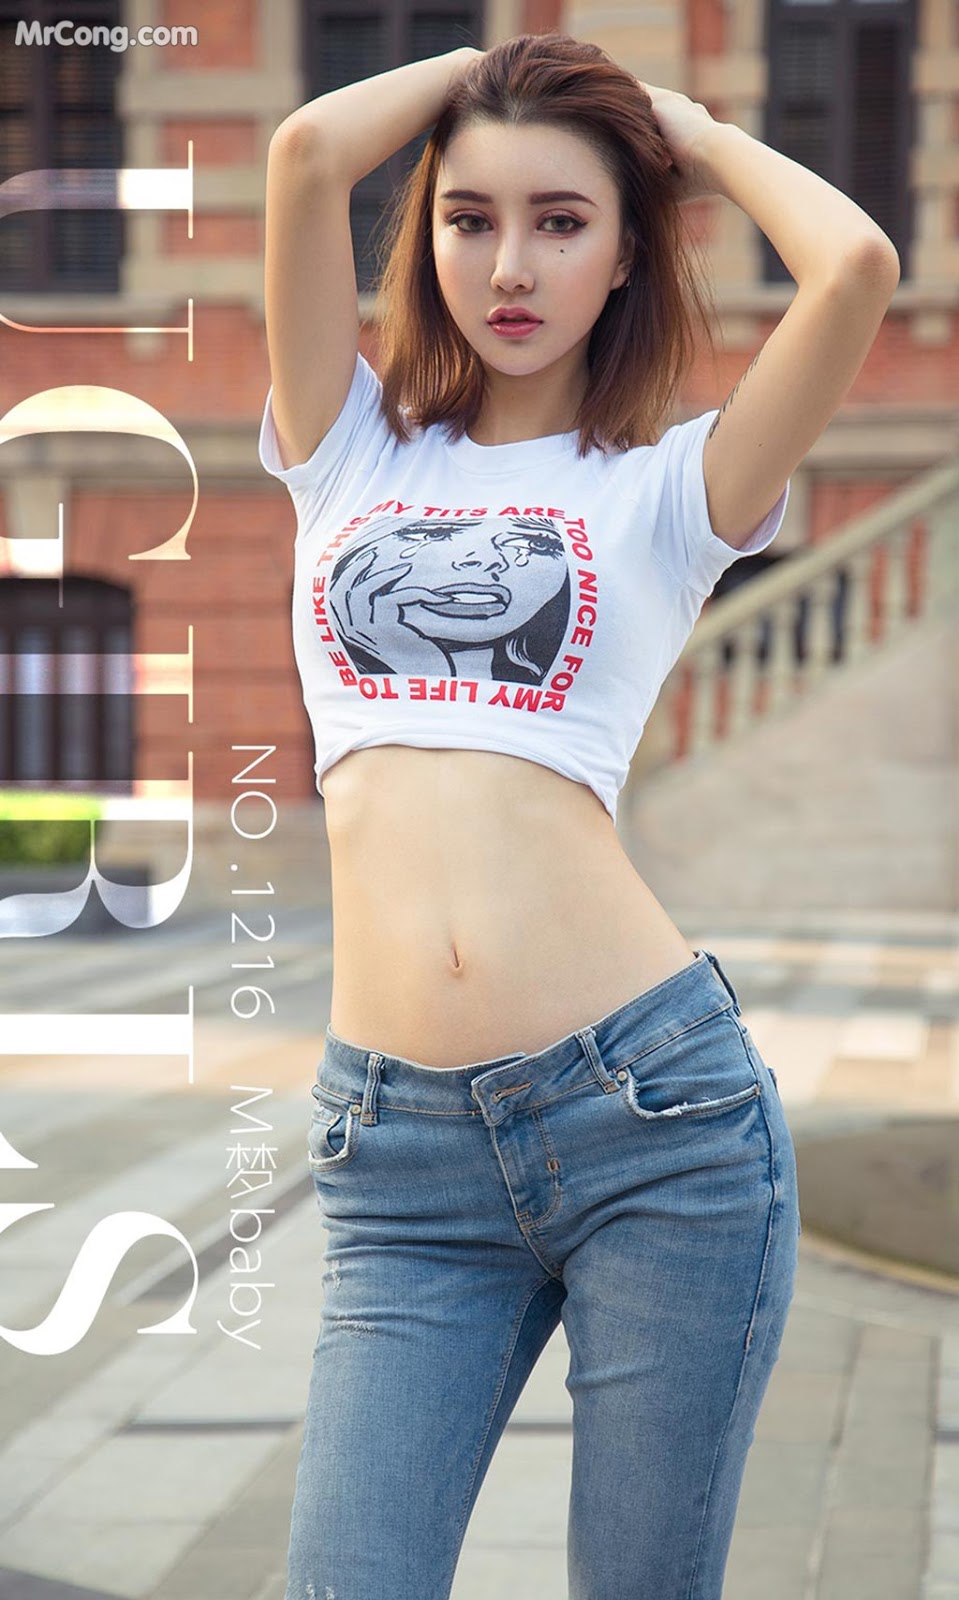 UGIRLS - Ai You Wu App No. 1216: Model M 梦 baby (35 pictures)